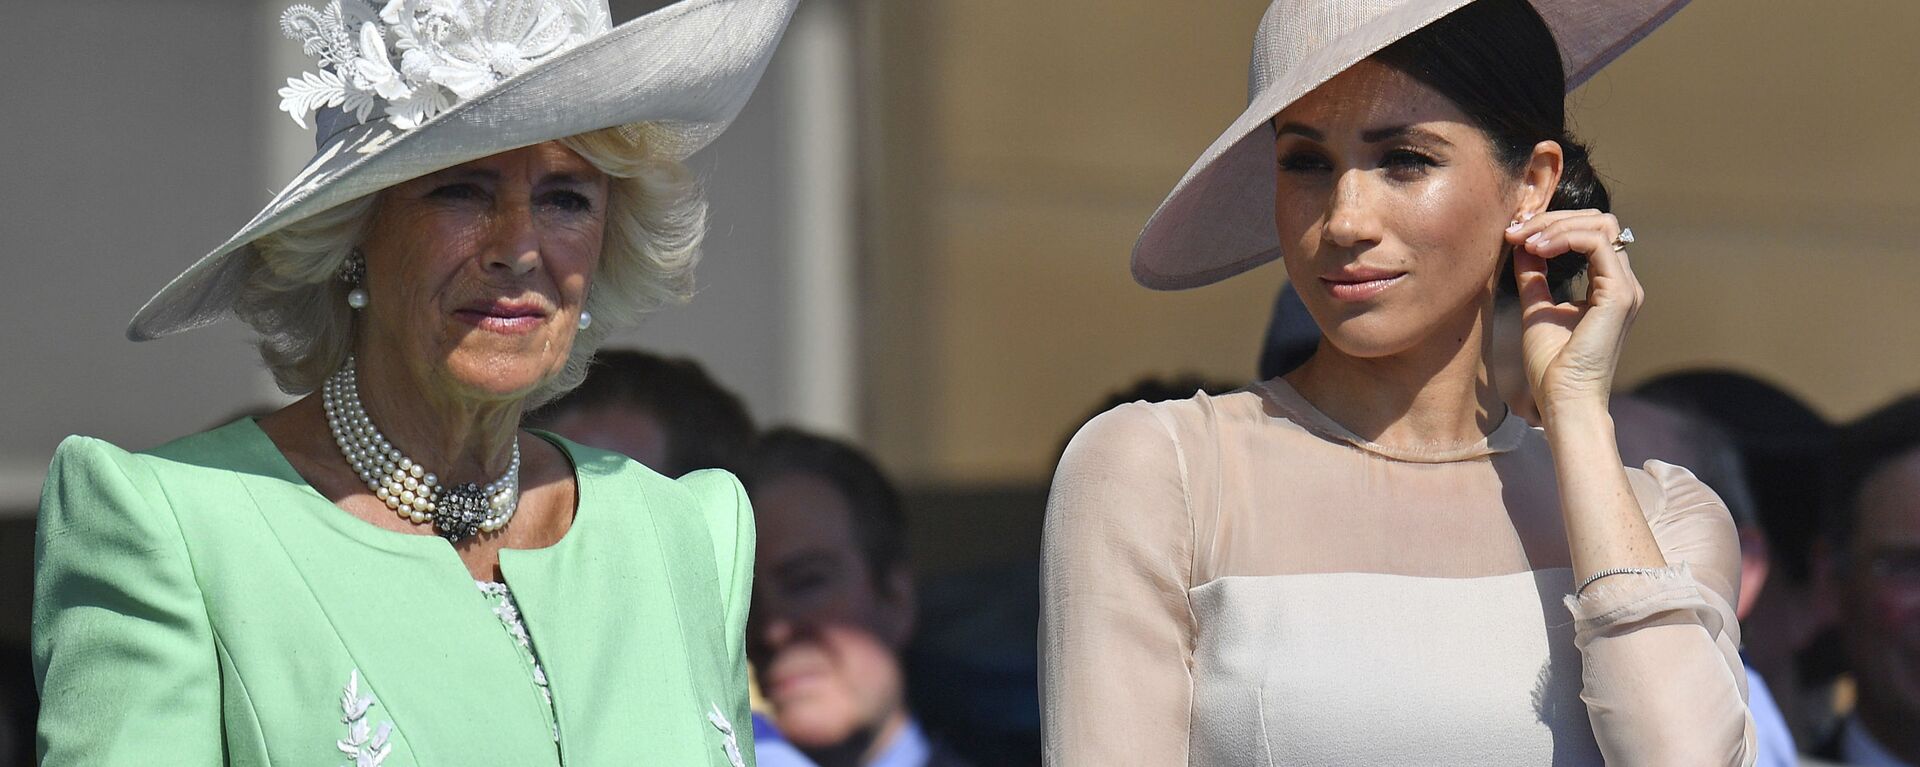 Meghan, the Duchess of Sussex, right, stands with Camilla, the Duchess of Cornwall, during a garden party at Buckingham Palace in London, Tuesday May 22, 2018. - Sputnik International, 1920, 22.07.2022